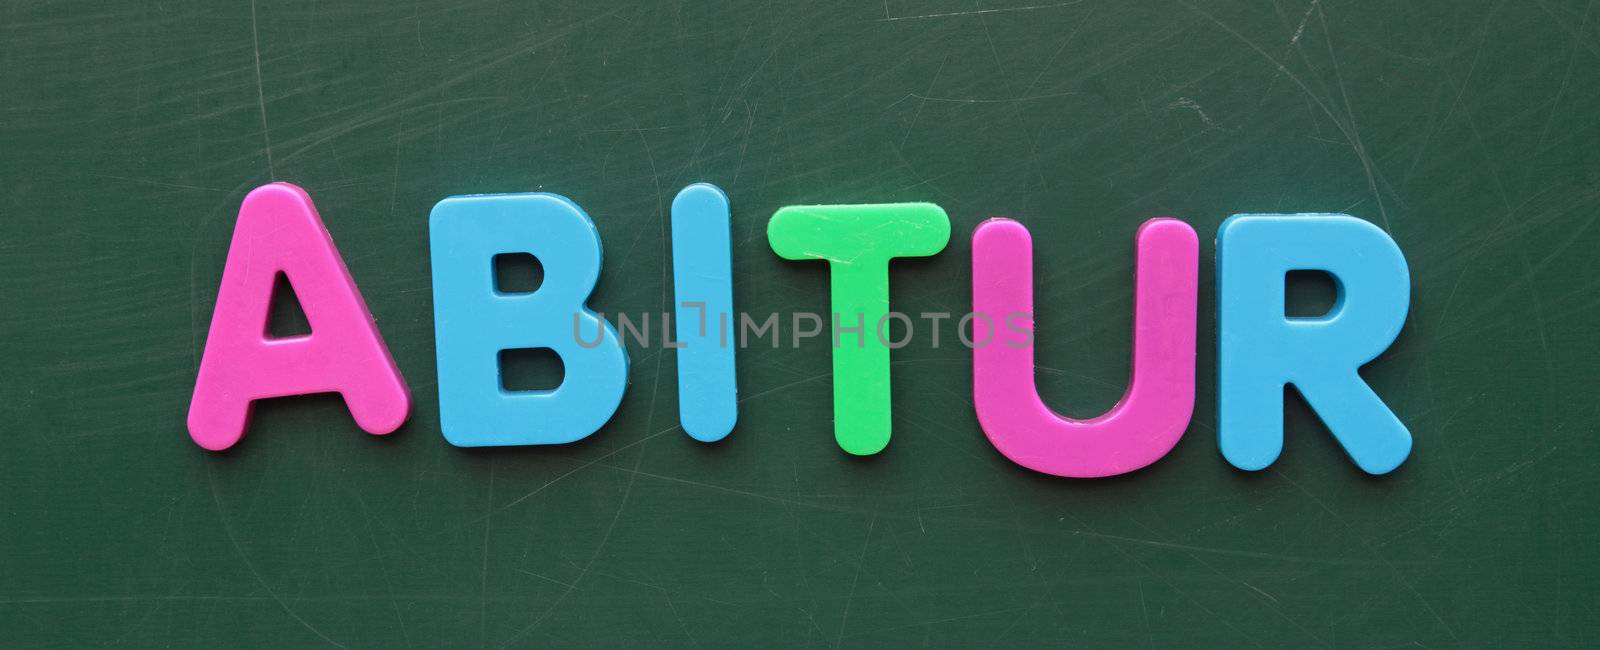 The german term for high-school diploma in colorful letters on a blackboard.